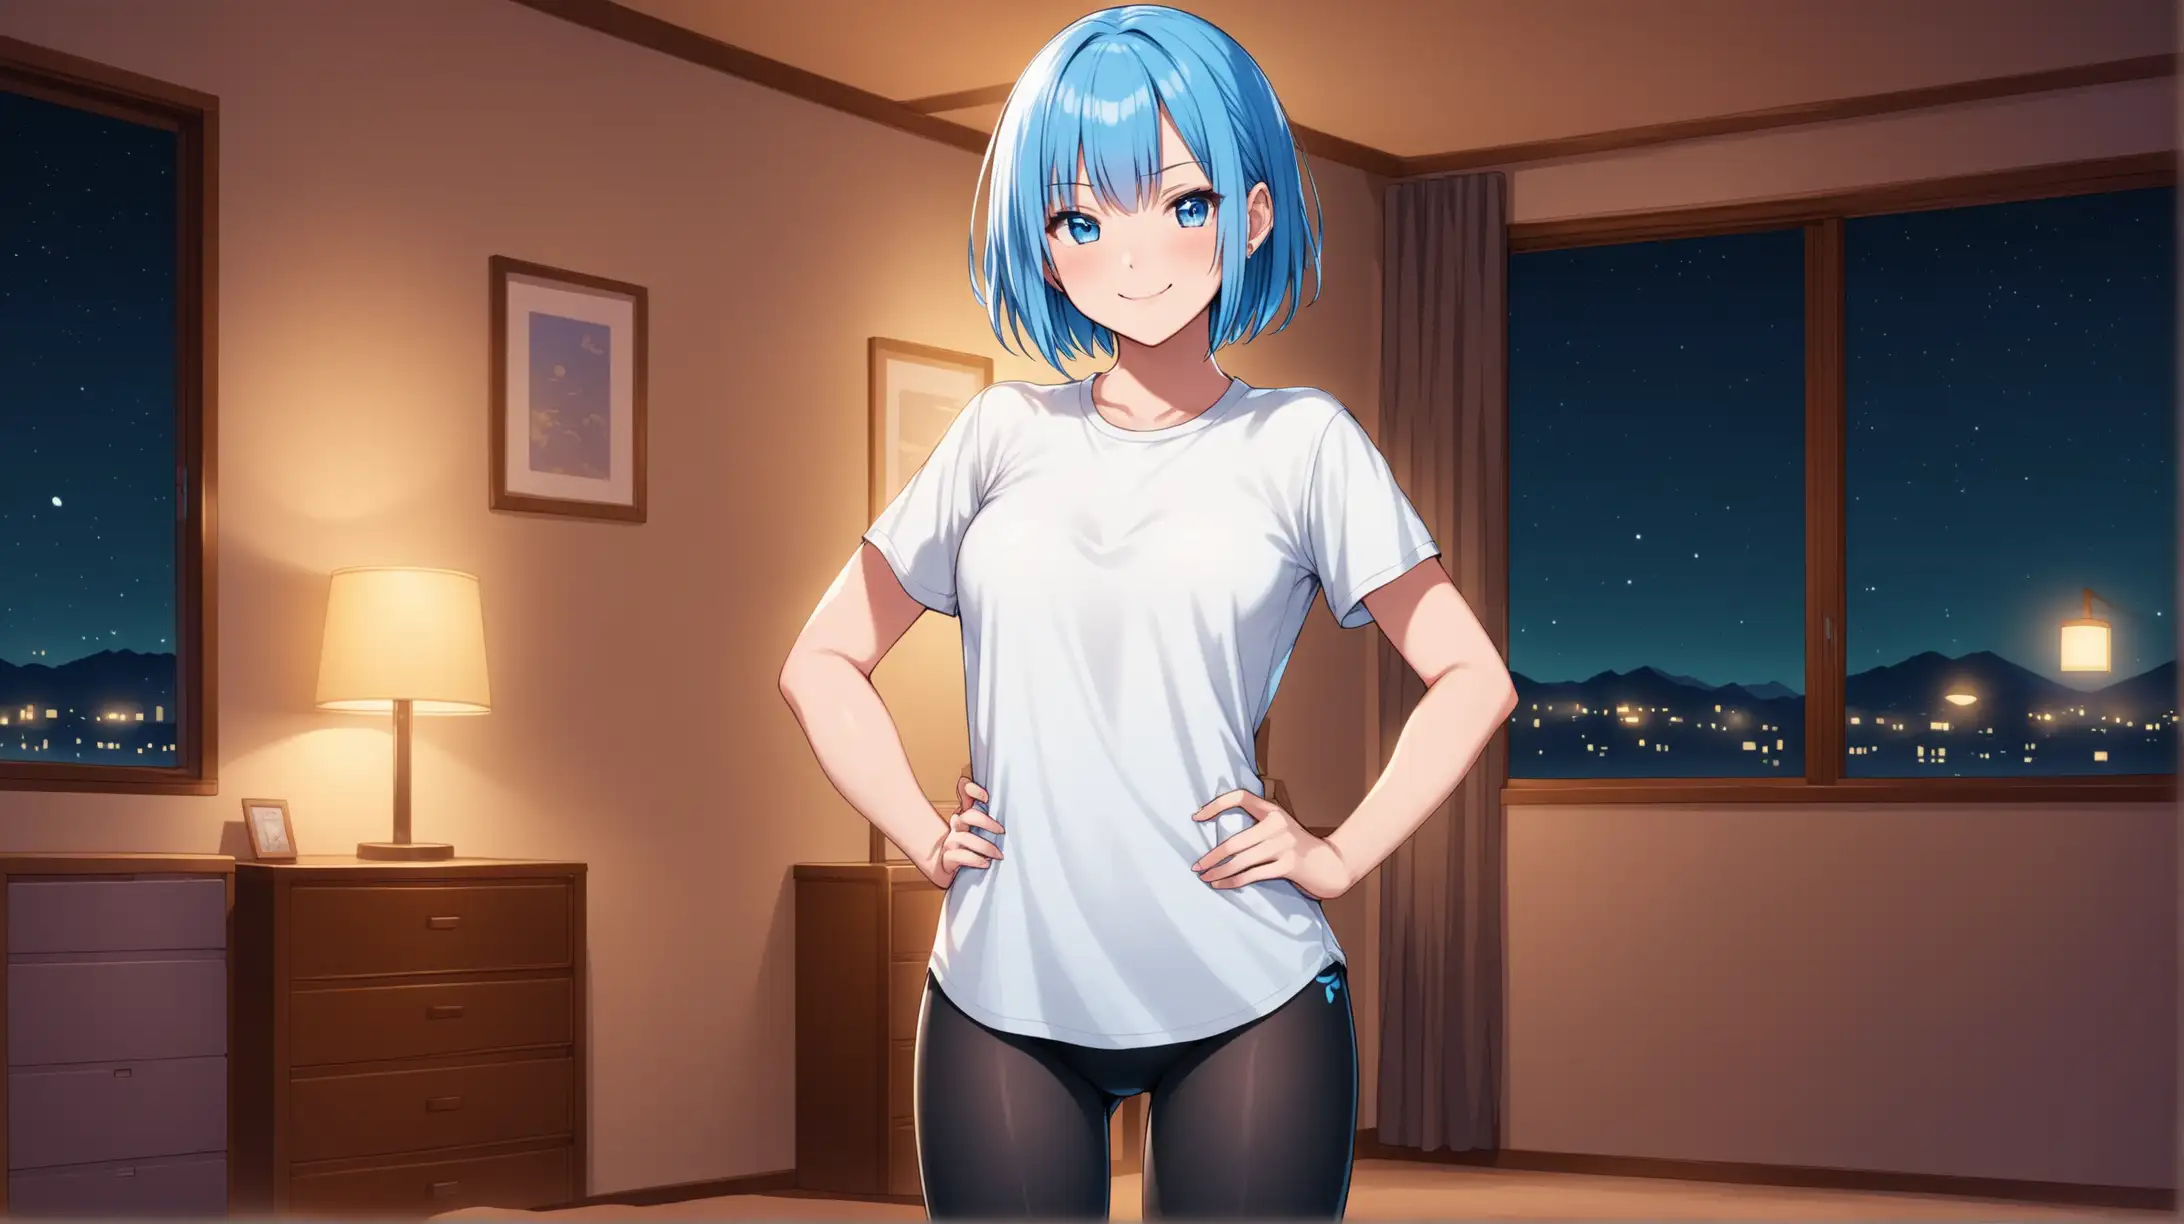 Draw the character Rem, high quality, standing with a hand on her hip, indoors, at night, wearing leggings and a shirt, smiling at the viewer